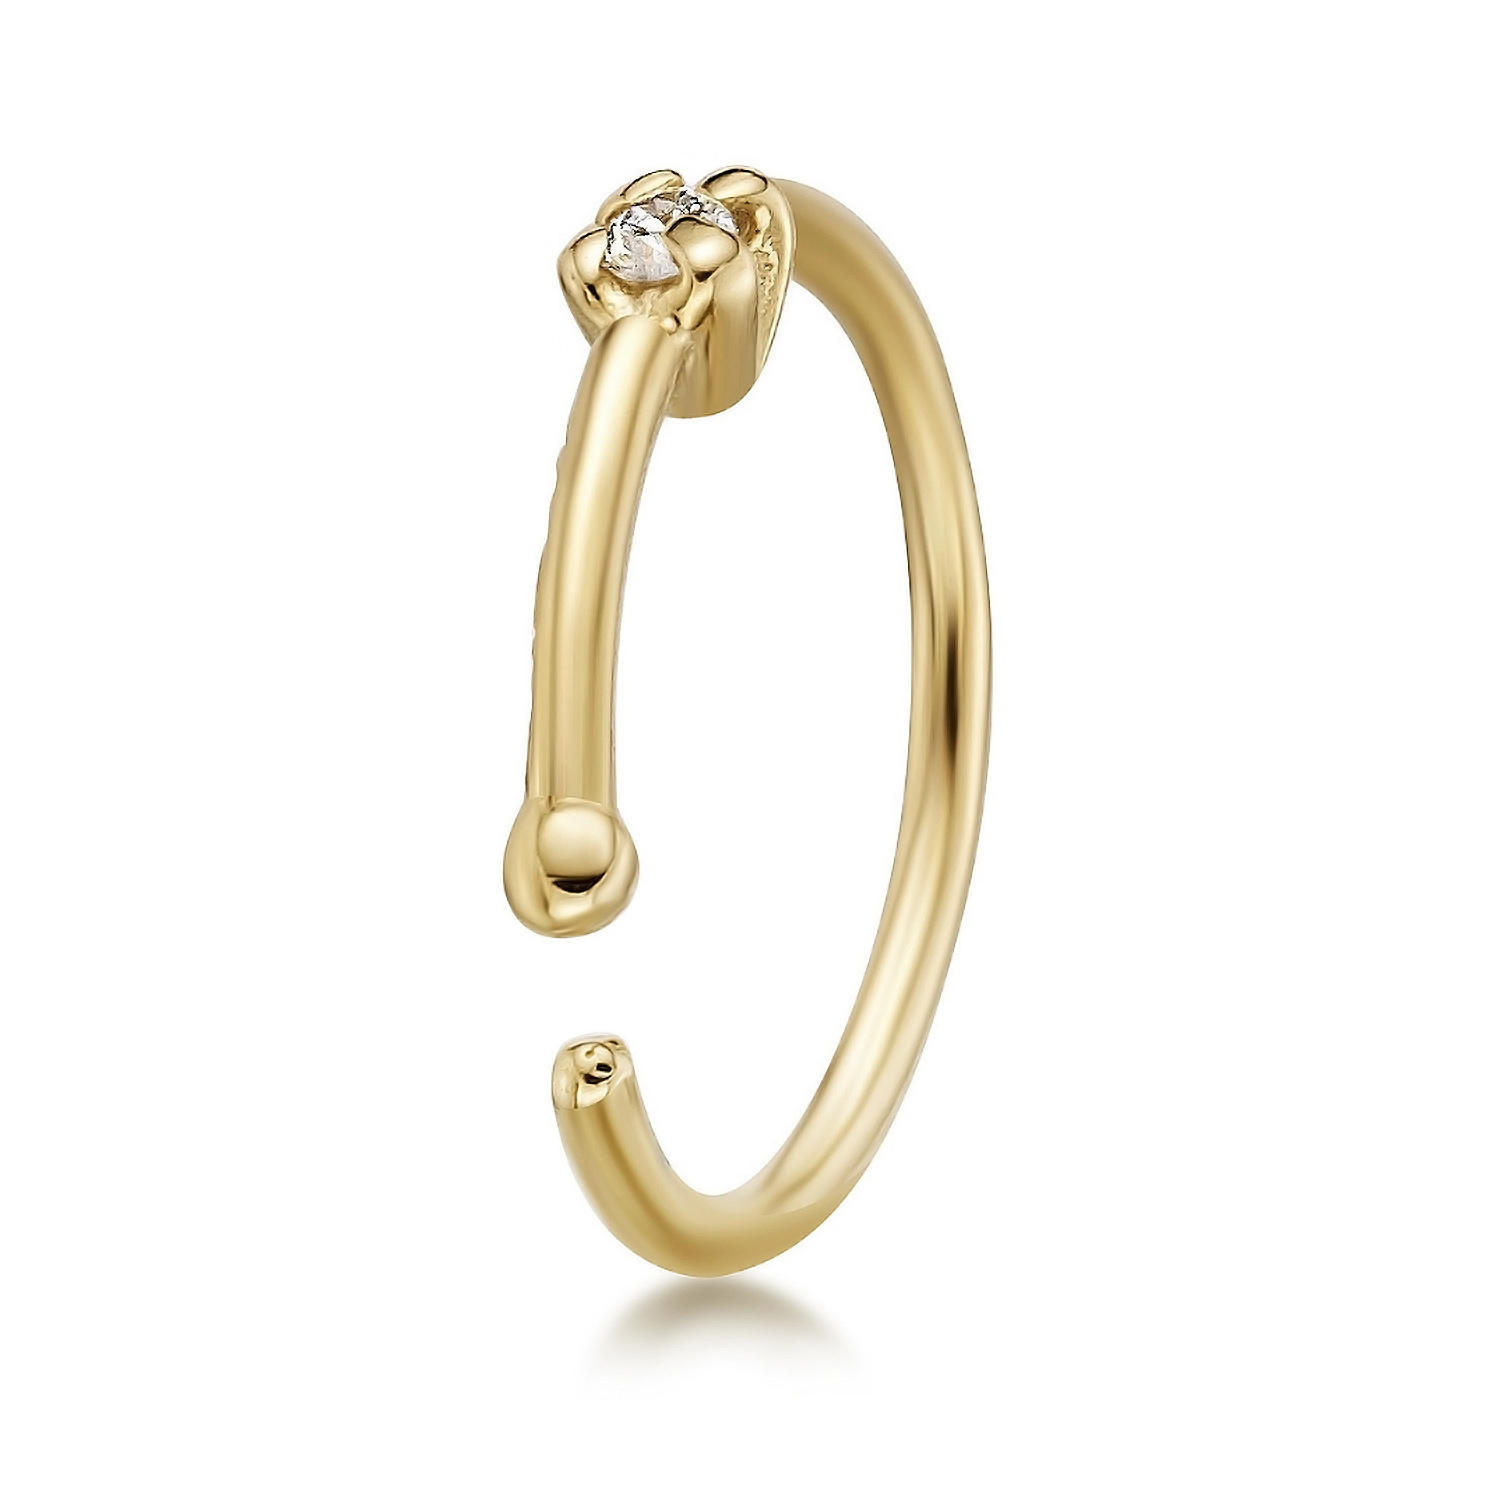 Gold Nose Ring - Buy Gold Nose Ring Online Starting at Just ₹59 | Meesho